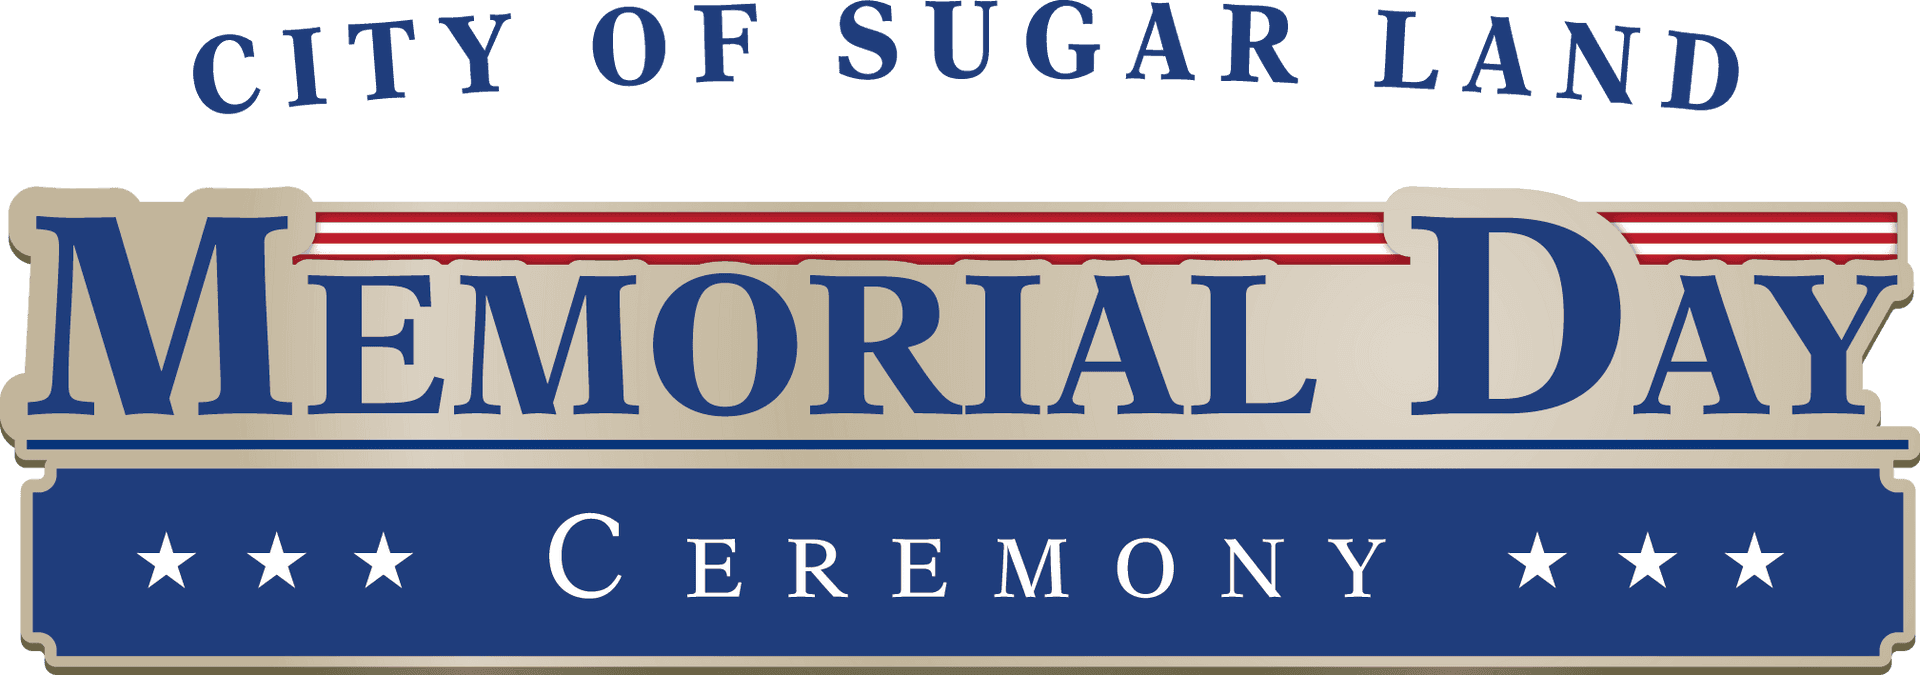 Sugar Land Memorial Day Ceremony Banner PNG image